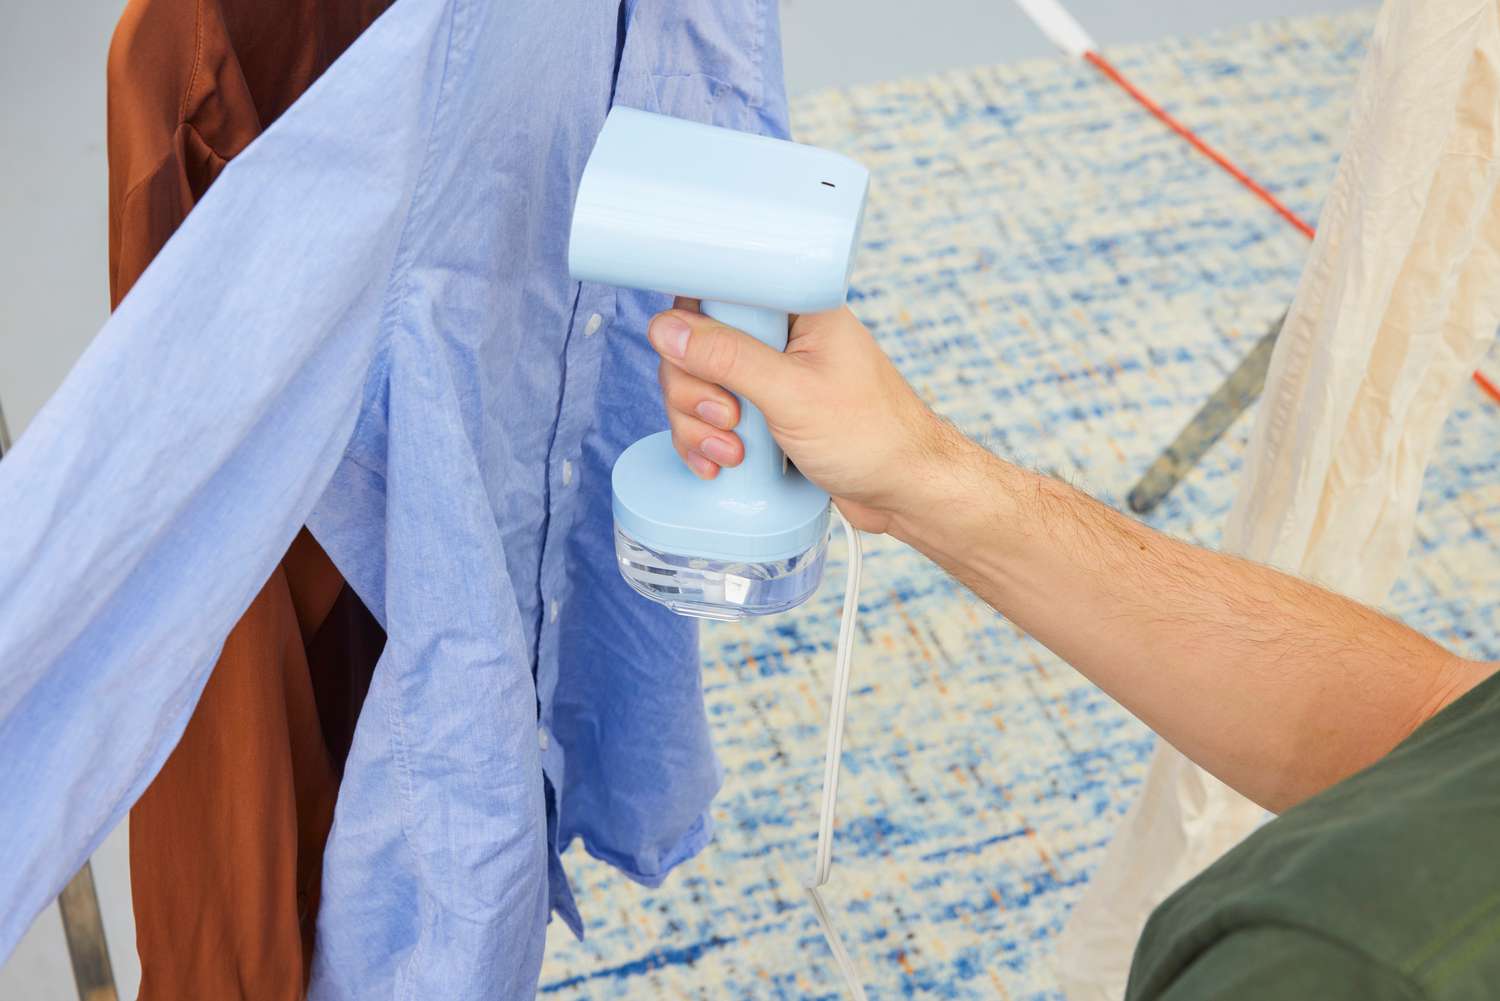 A person using the Proctor Silex Compact 2-in-1 Garment Steamer/Iron to steam a shirt.